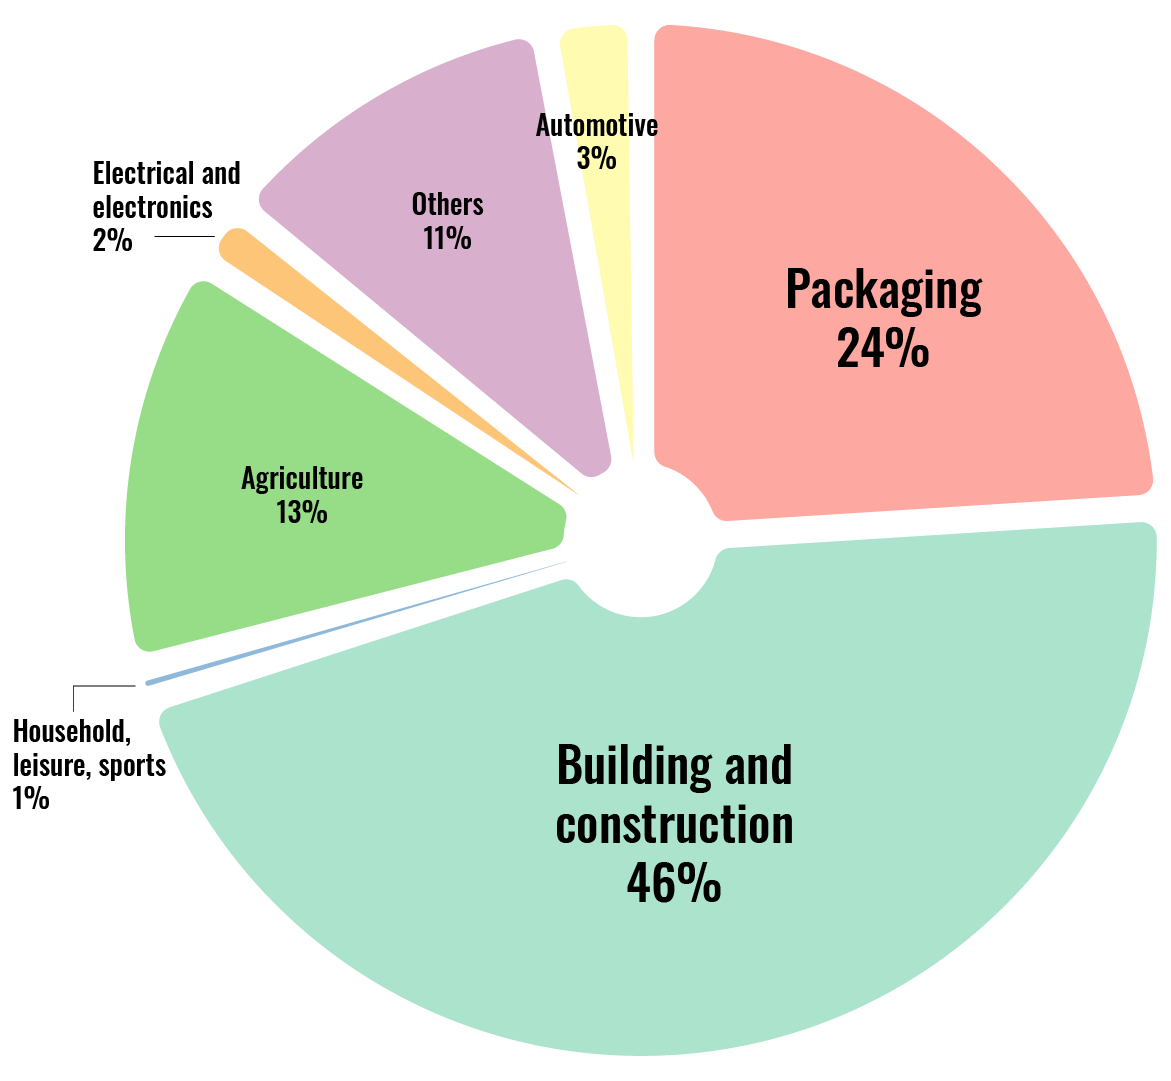 Pie chart showing that the packaging and building and construction industries have the most demand for plastic production